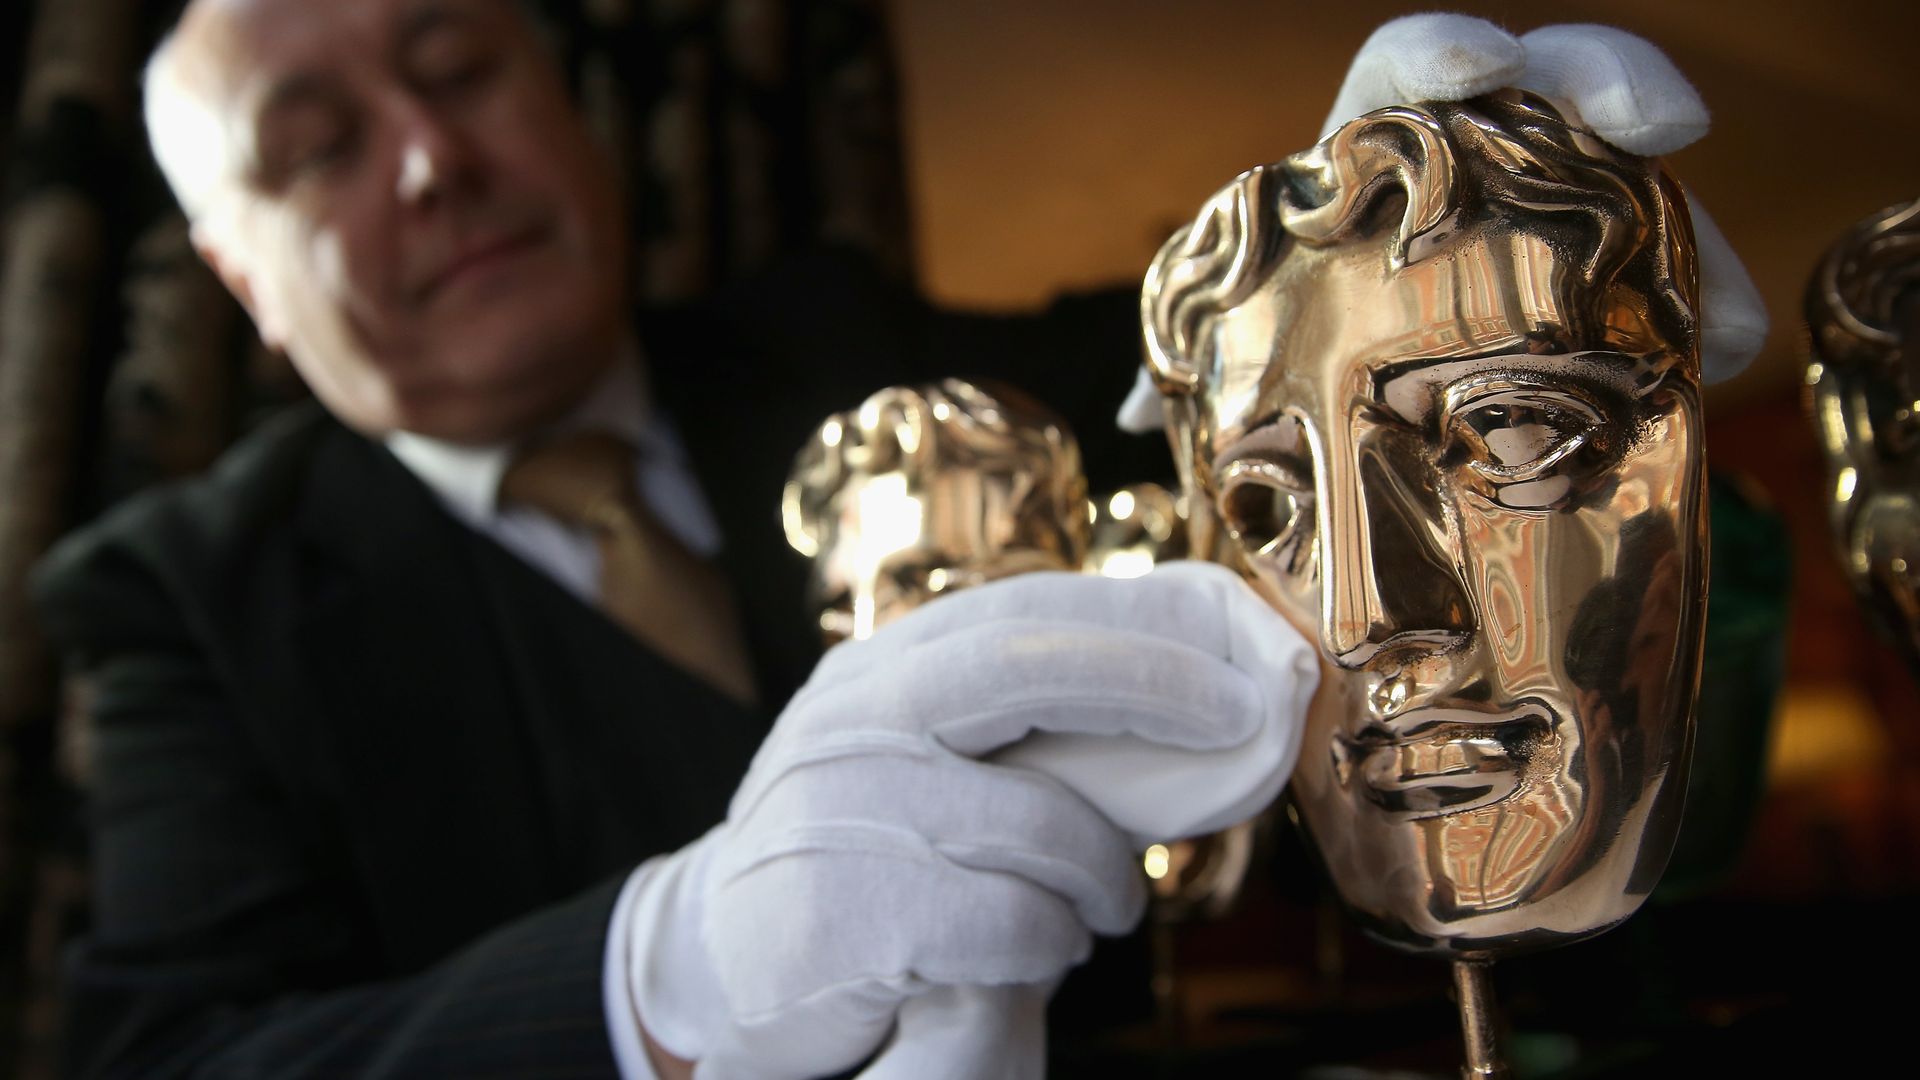 The iconic BAFTA mask awards are polished by a butler at the Savoy Hotel ahead of the British Academy Film Awards 